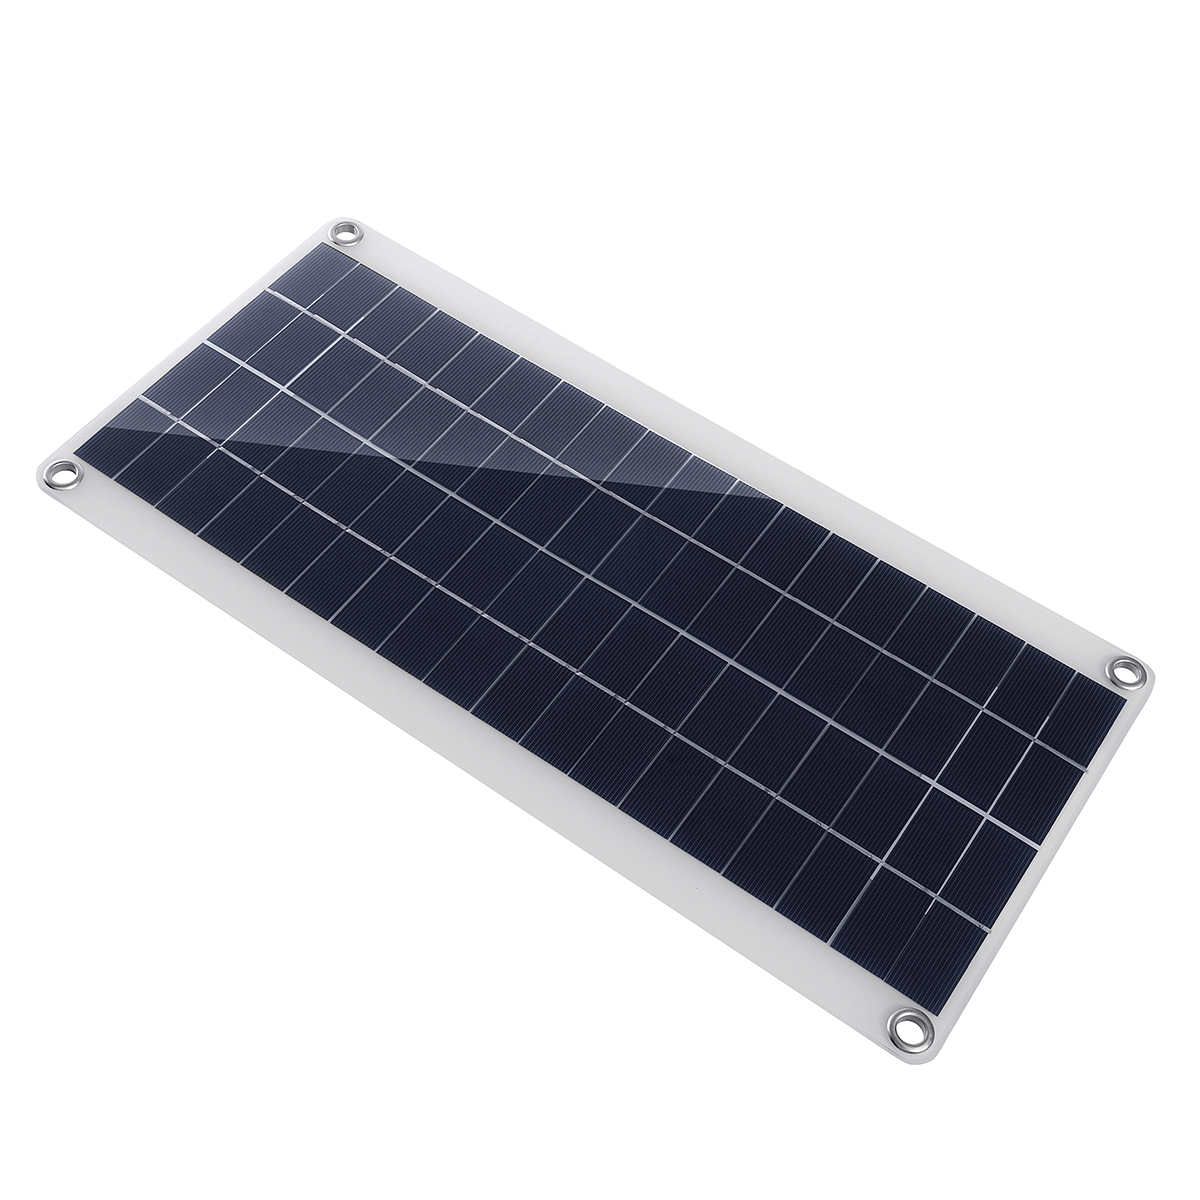 20W-Portable-Solar-Panel-Kit-DC-USB-Charging-Double-USB-Port-Suction-Cups-Camping-Traveling-1383681-5